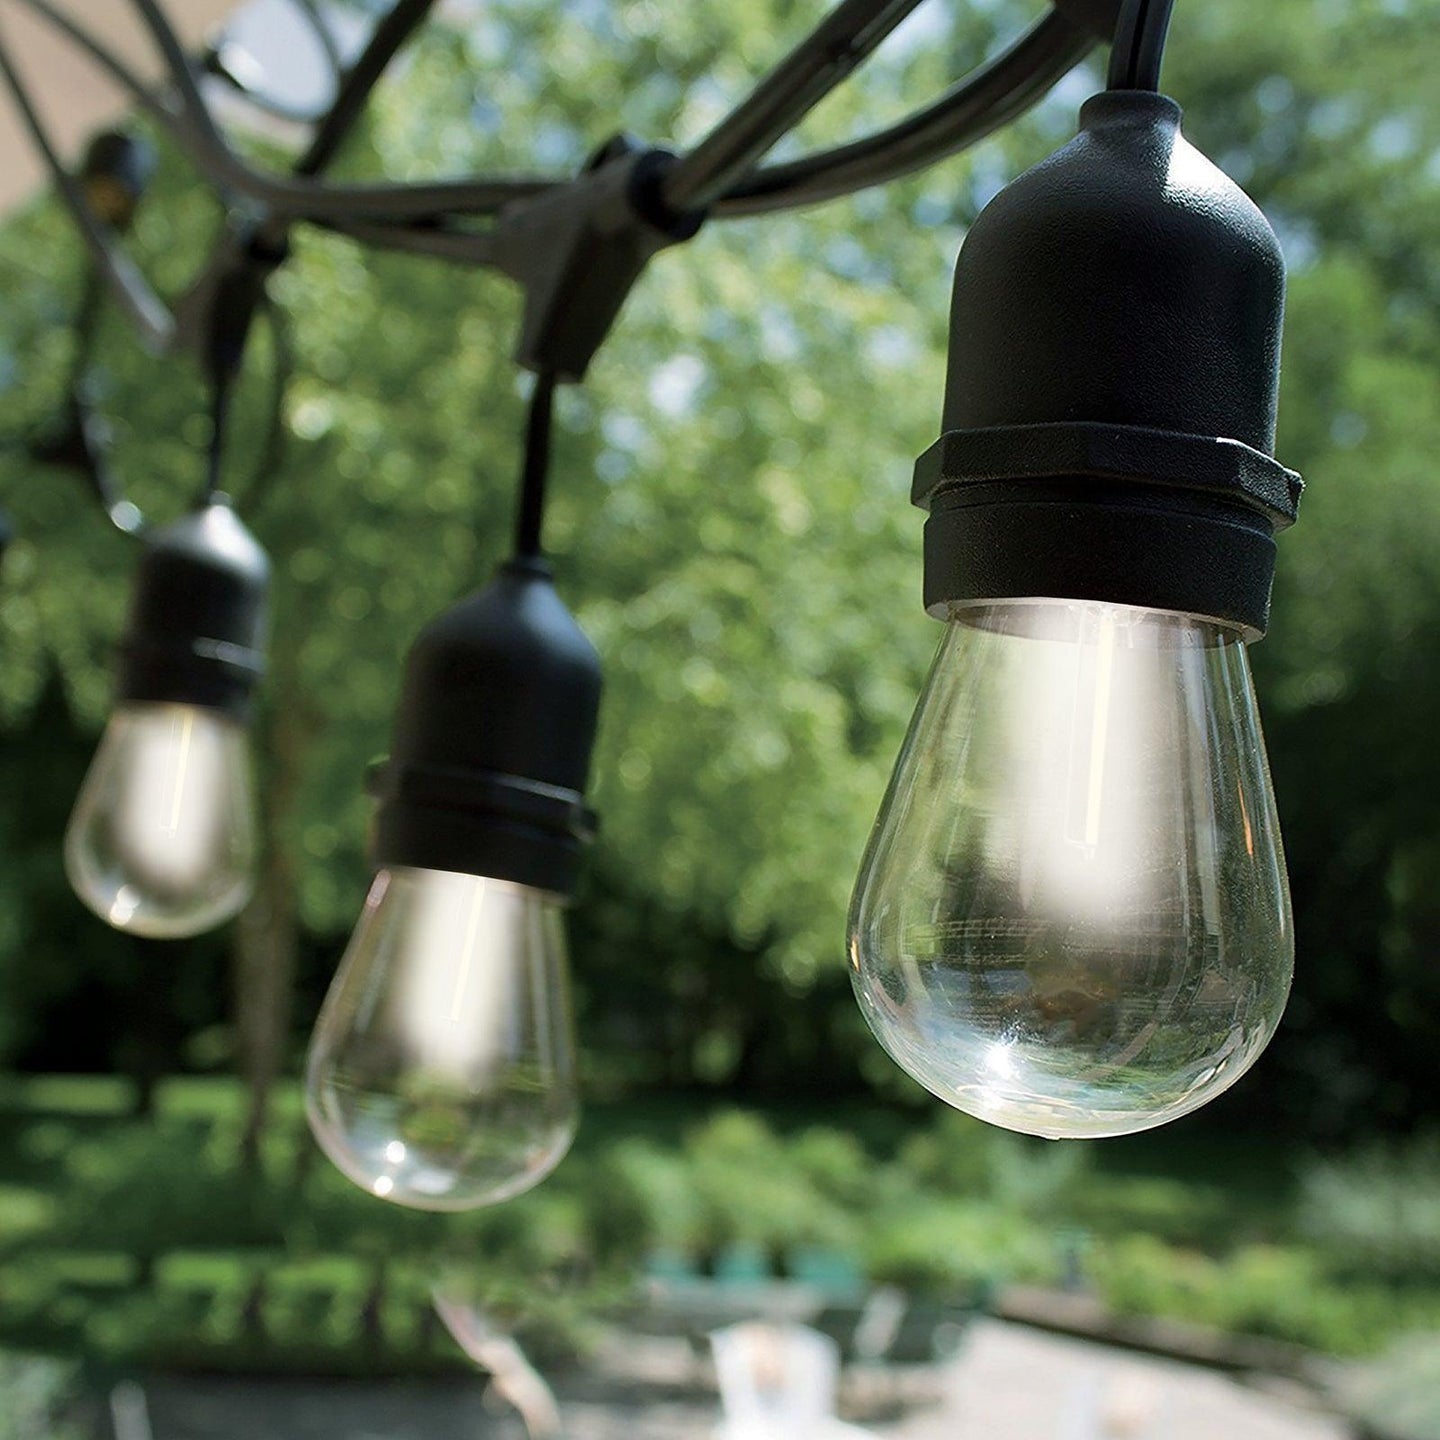 Buy Milano Decor Edison Globe Solar Powered Lamp String Lights - White - 20 Lights discounted | Products On Sale Australia